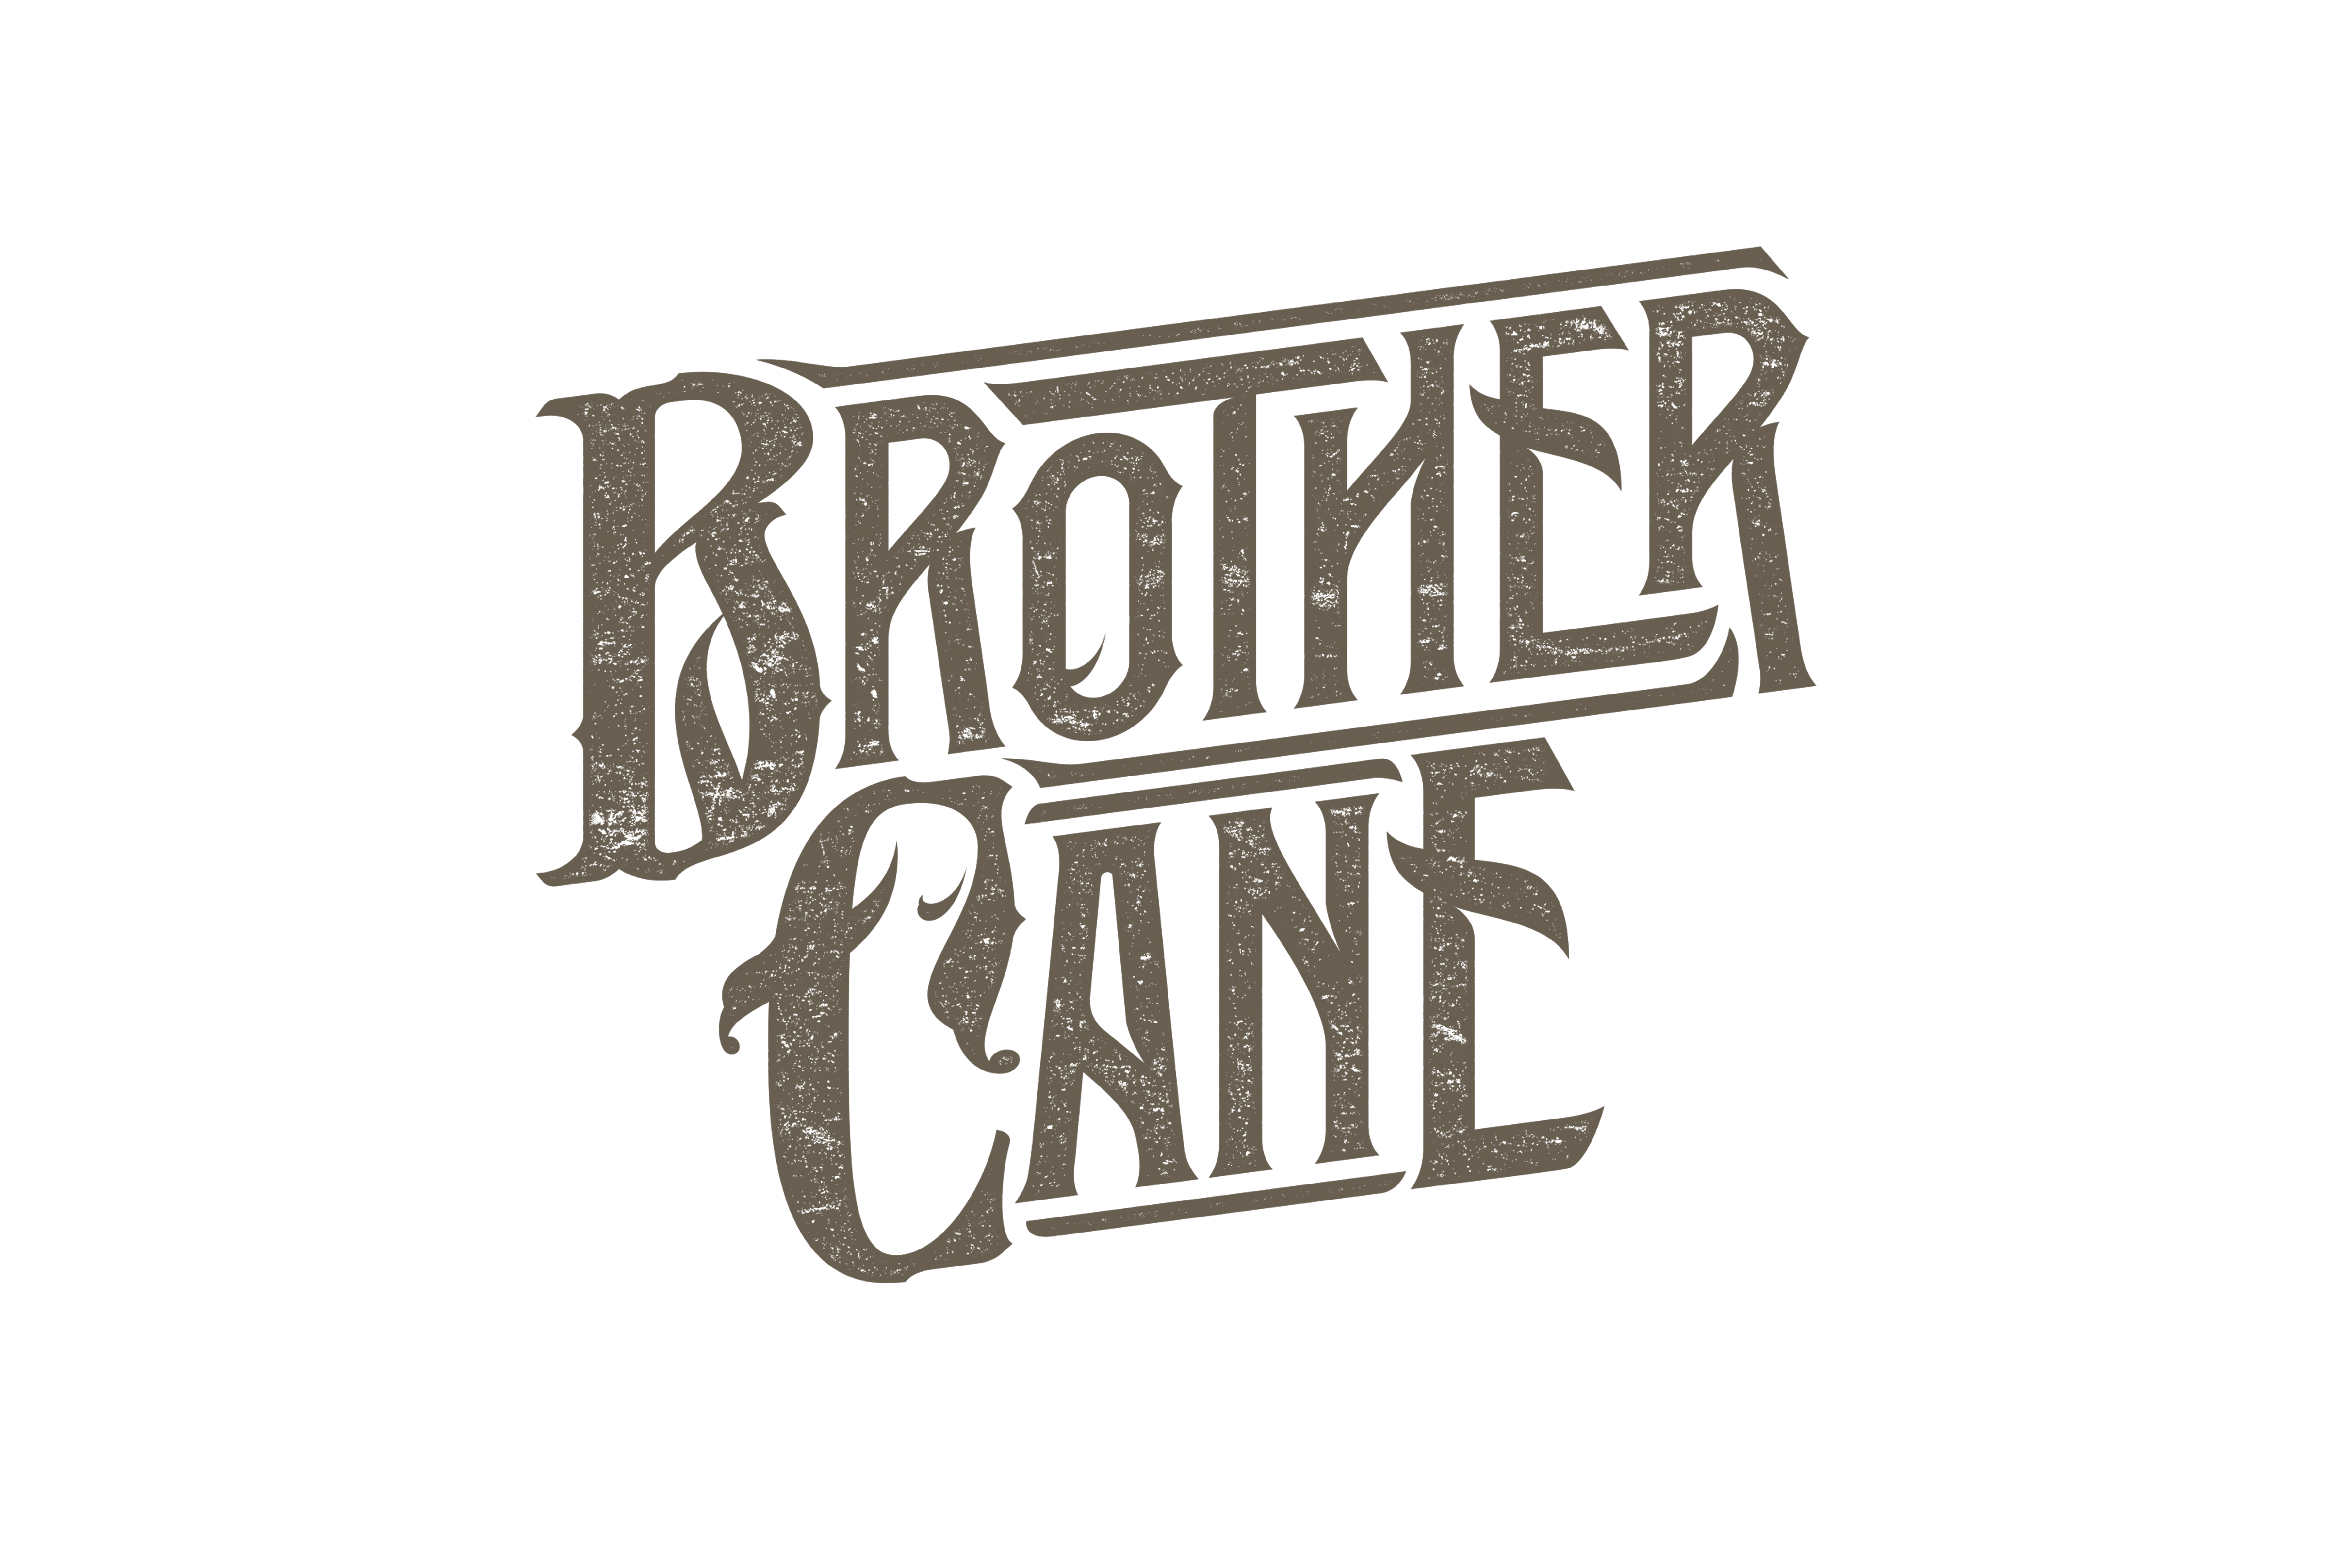 brother cane tour 2022